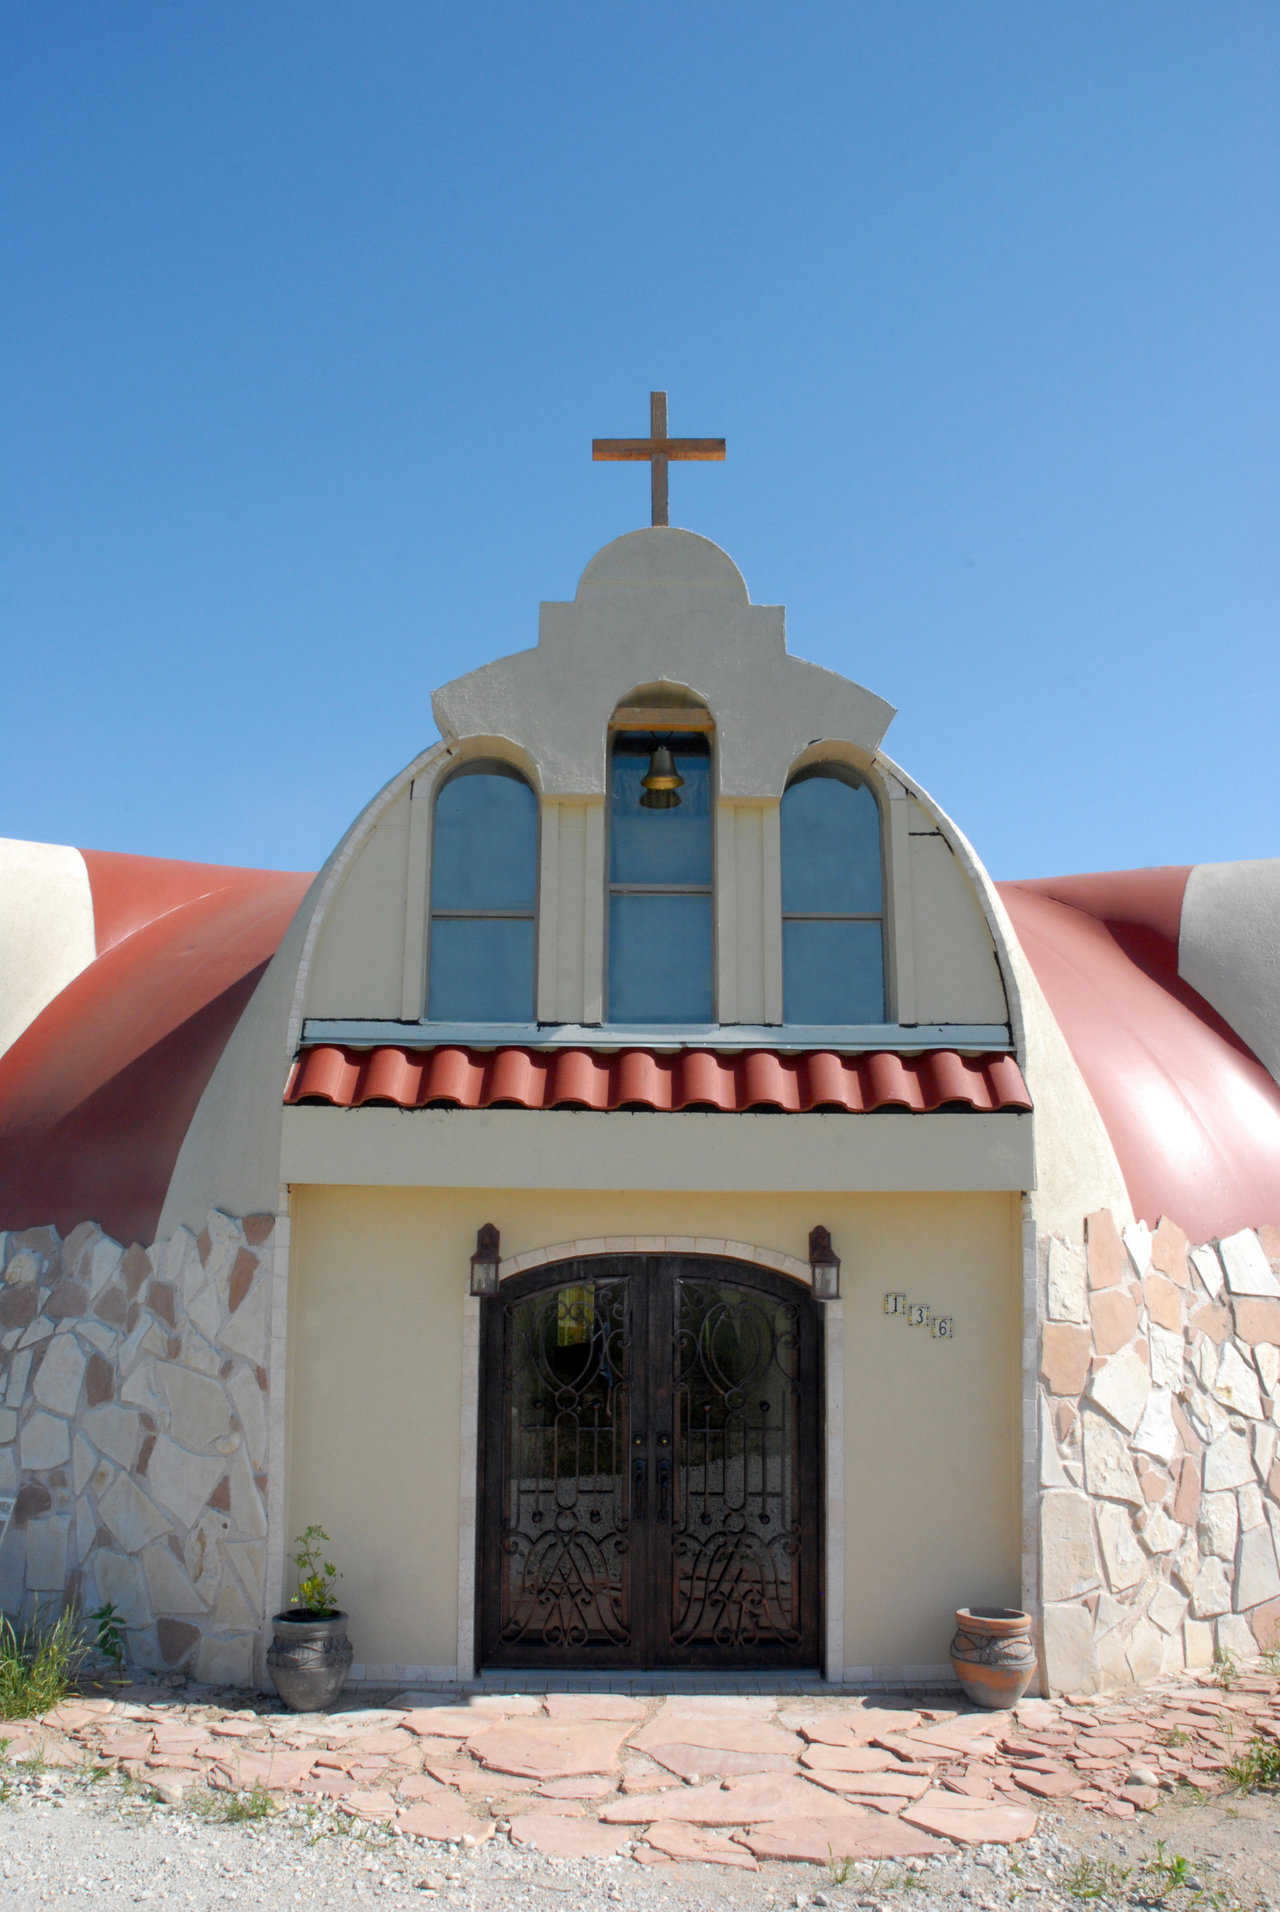 Here is a view of the front entrance from the outside. It truly does resemble a Spanish church.